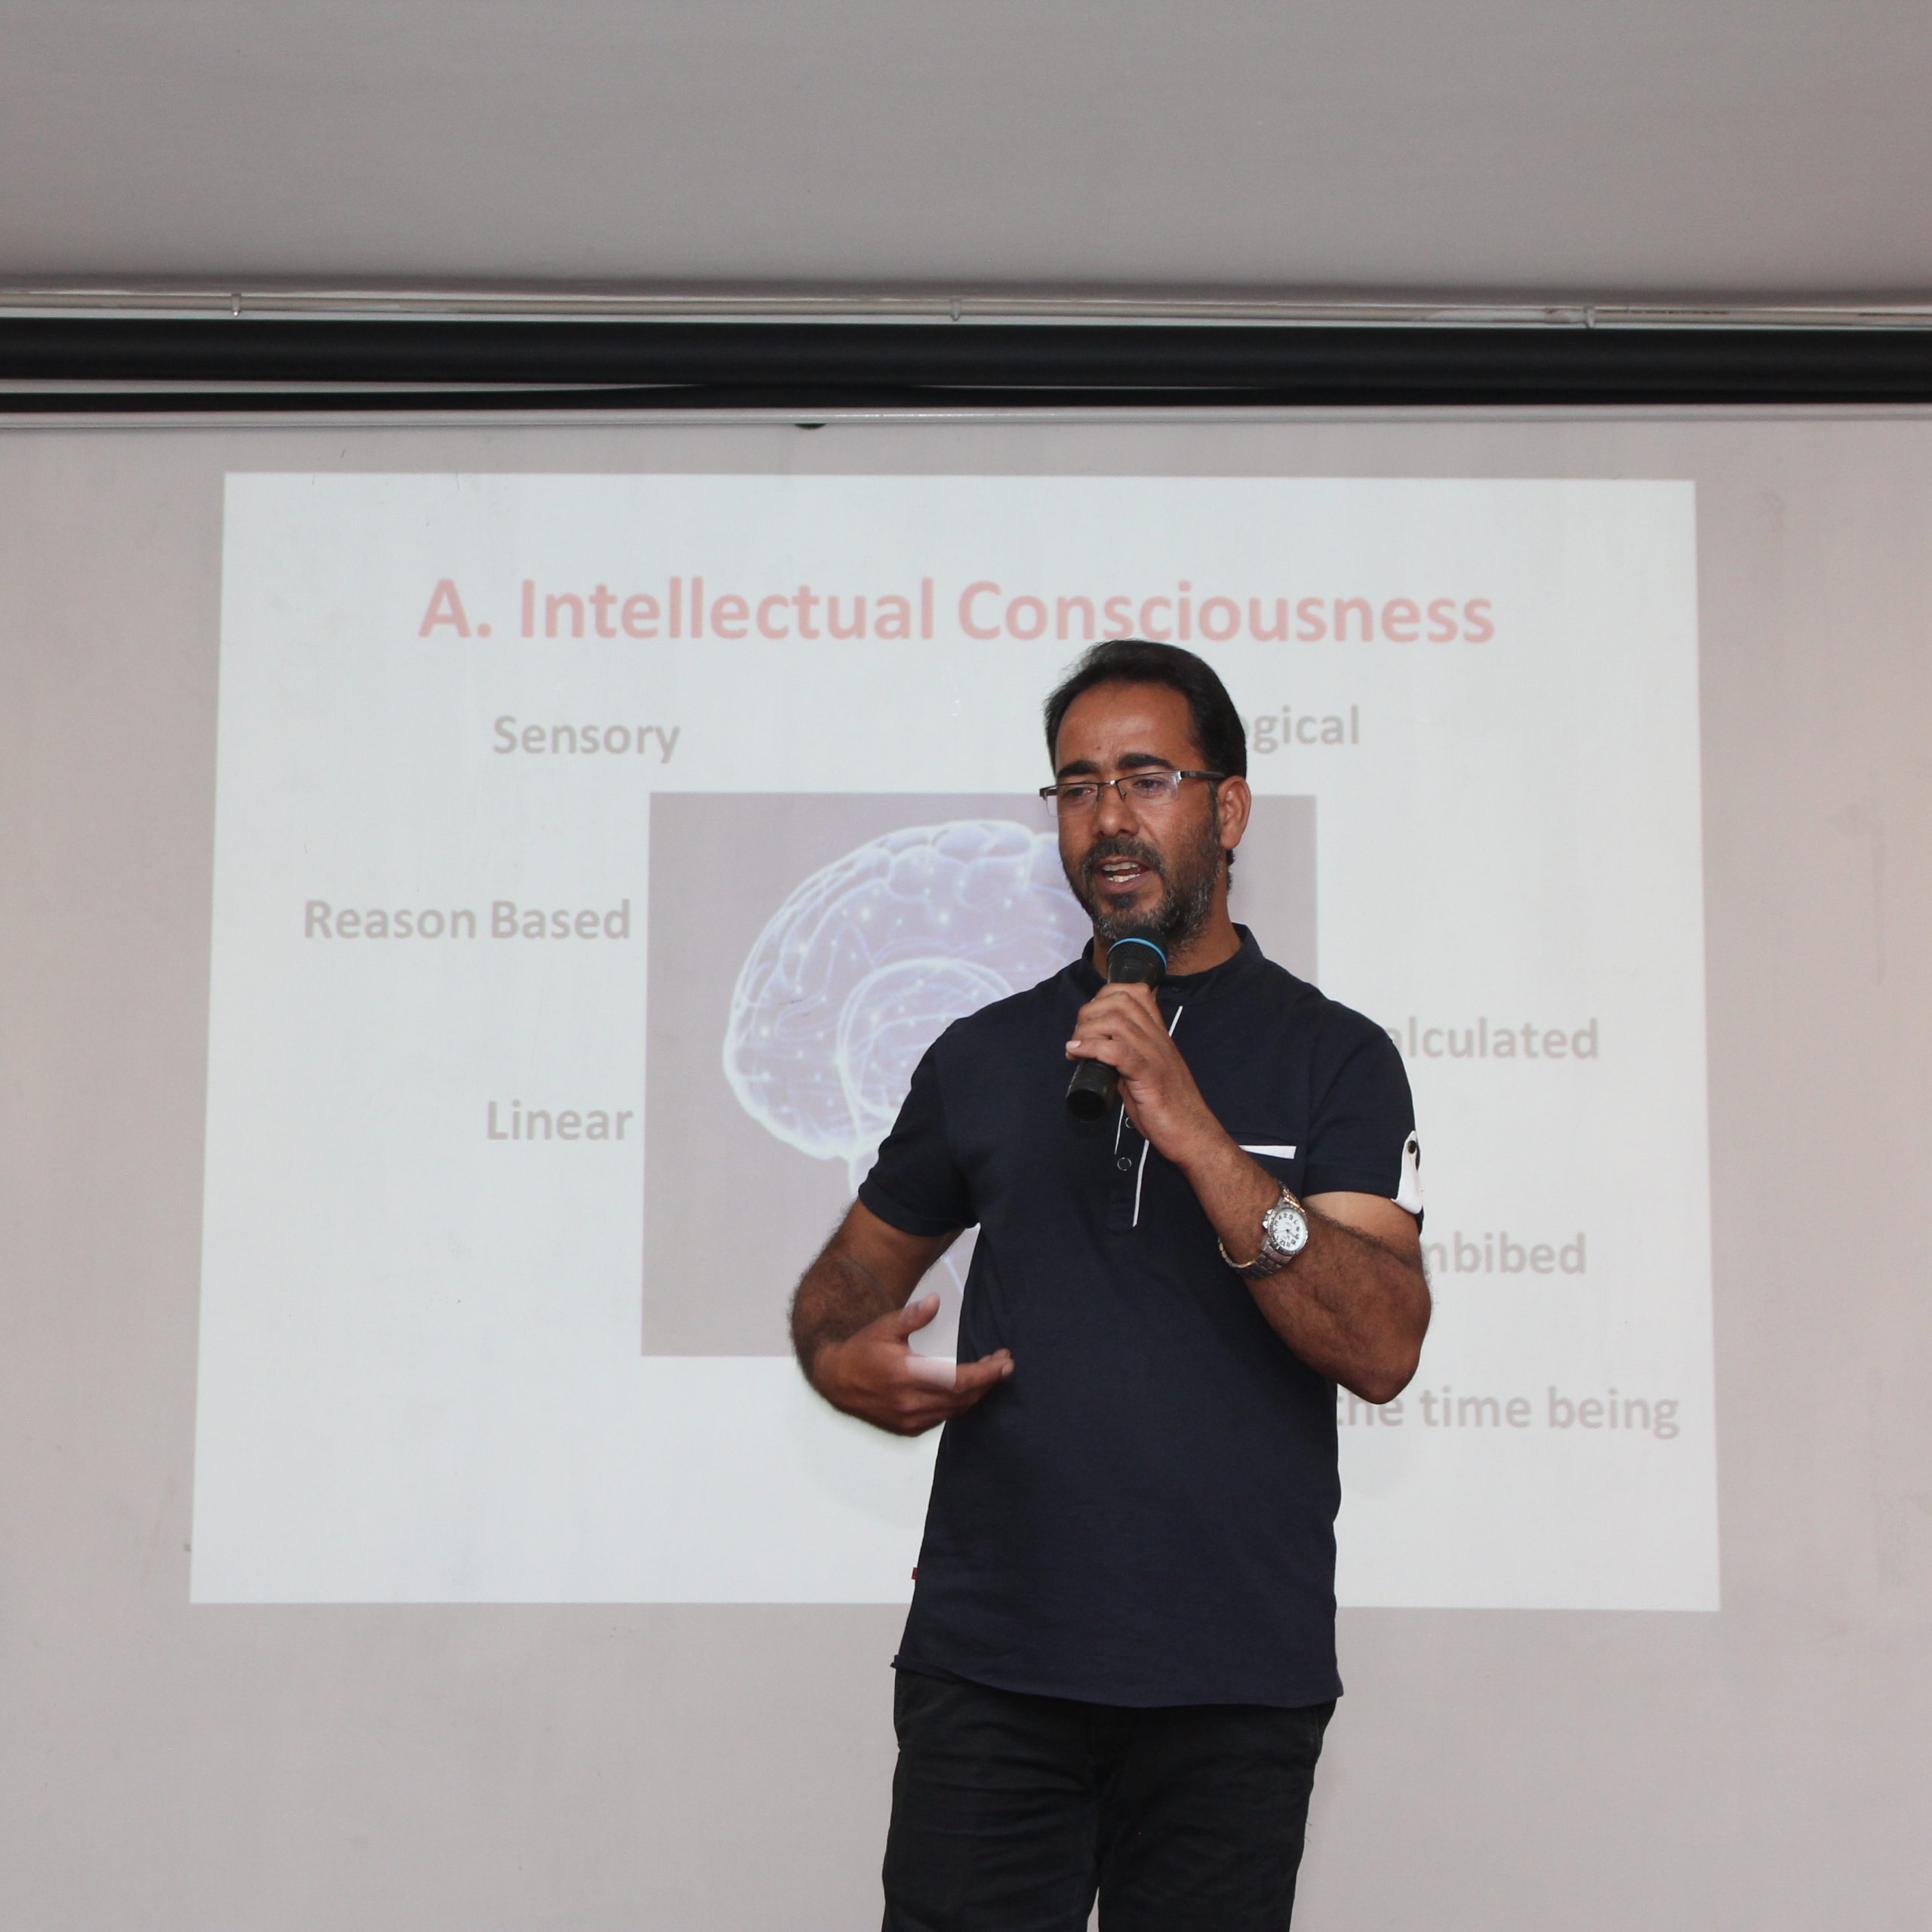 Workshop on consciousness and schooling